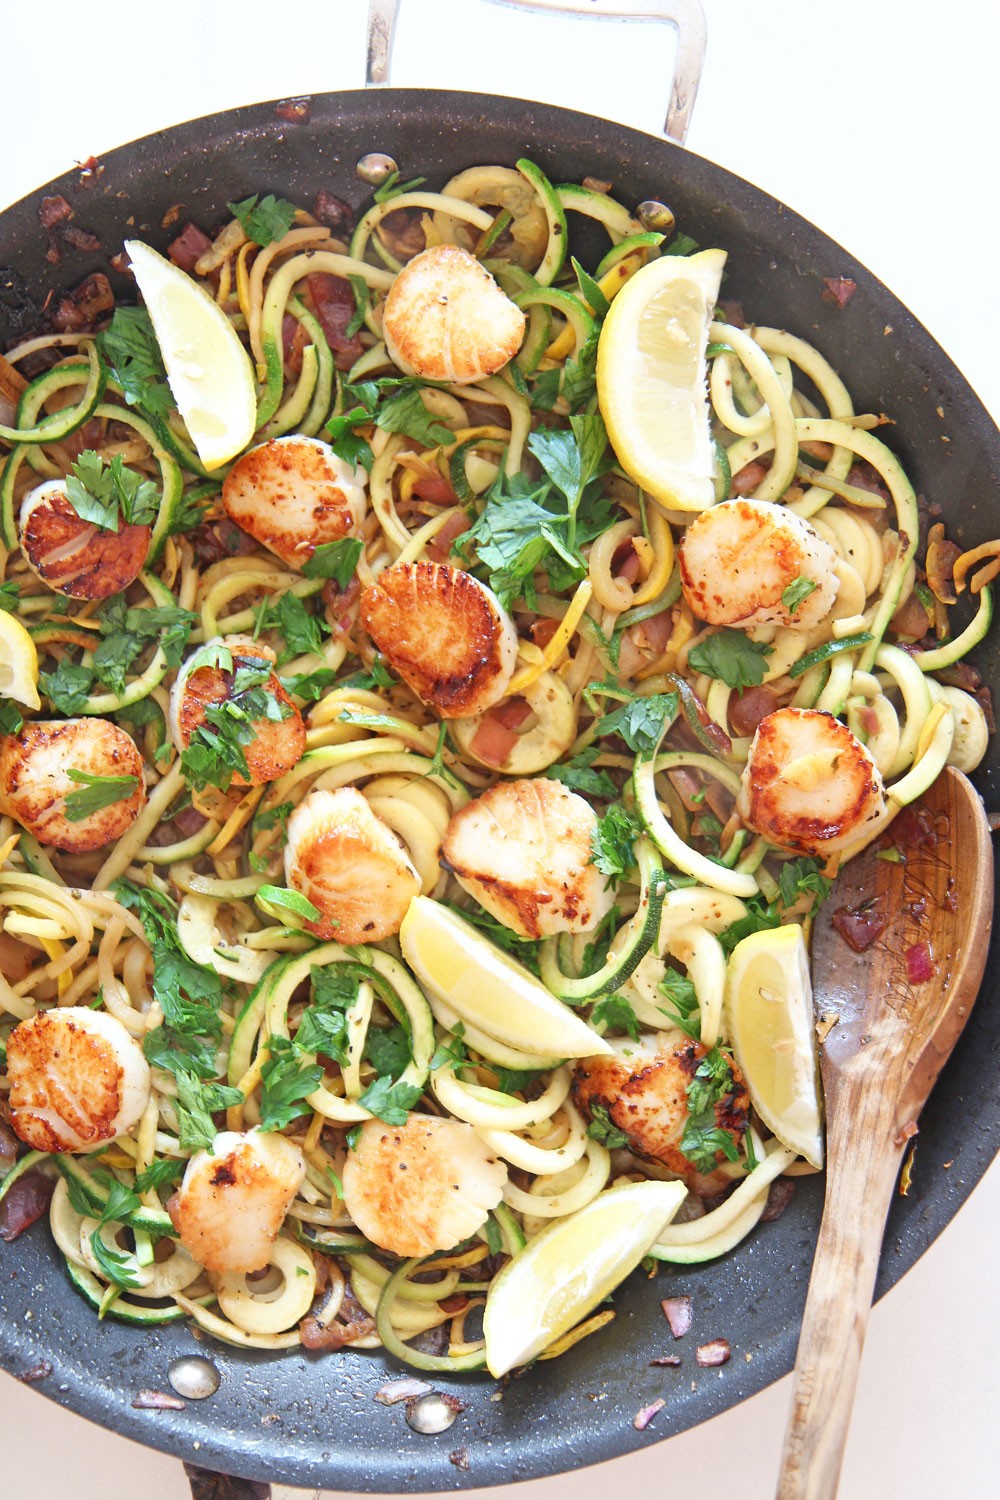 Scallop Scampi With Zoodles Recipe. Perfect one pan dinner with awesome seafood kiss. Grab scallops, garlic, lemon, vinegar, and zoodles. Perfect dinner fun for weeknight easy ideas. www.ChopHapy.com #scallops #scampirecipe